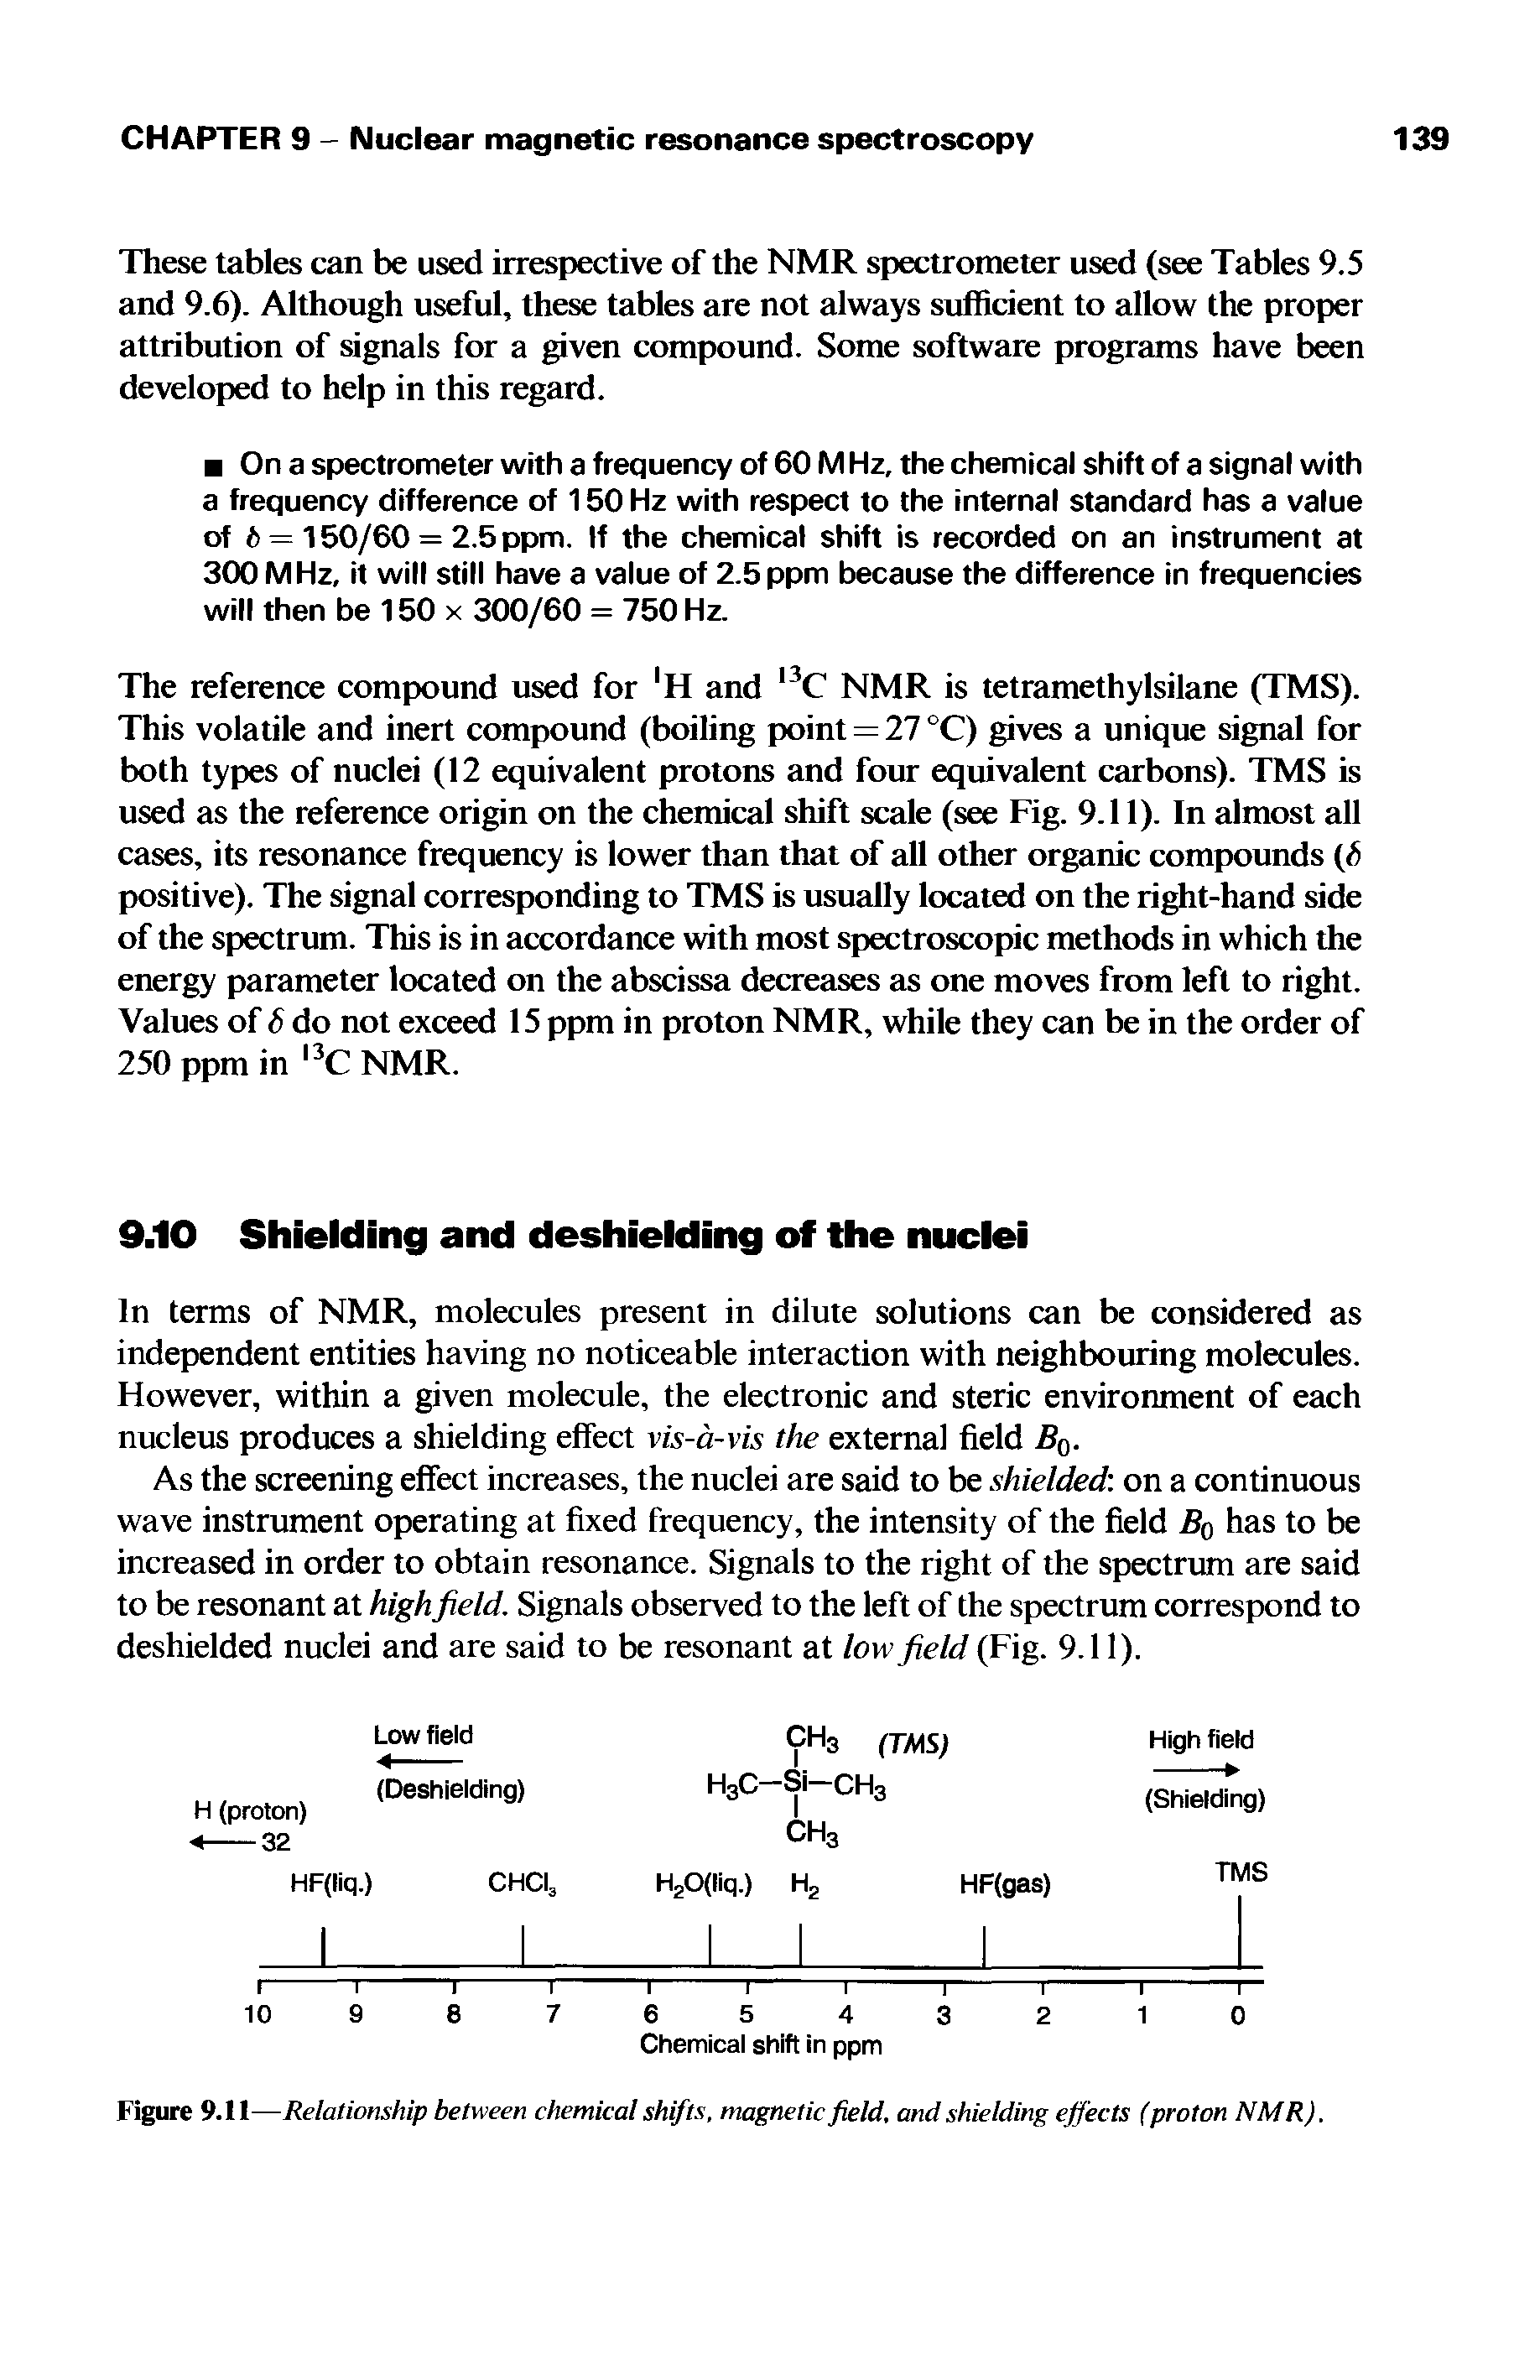 Figure 9.11—Relationship between chemical shifts, magnetic field, and shielding effects (proton NMR).